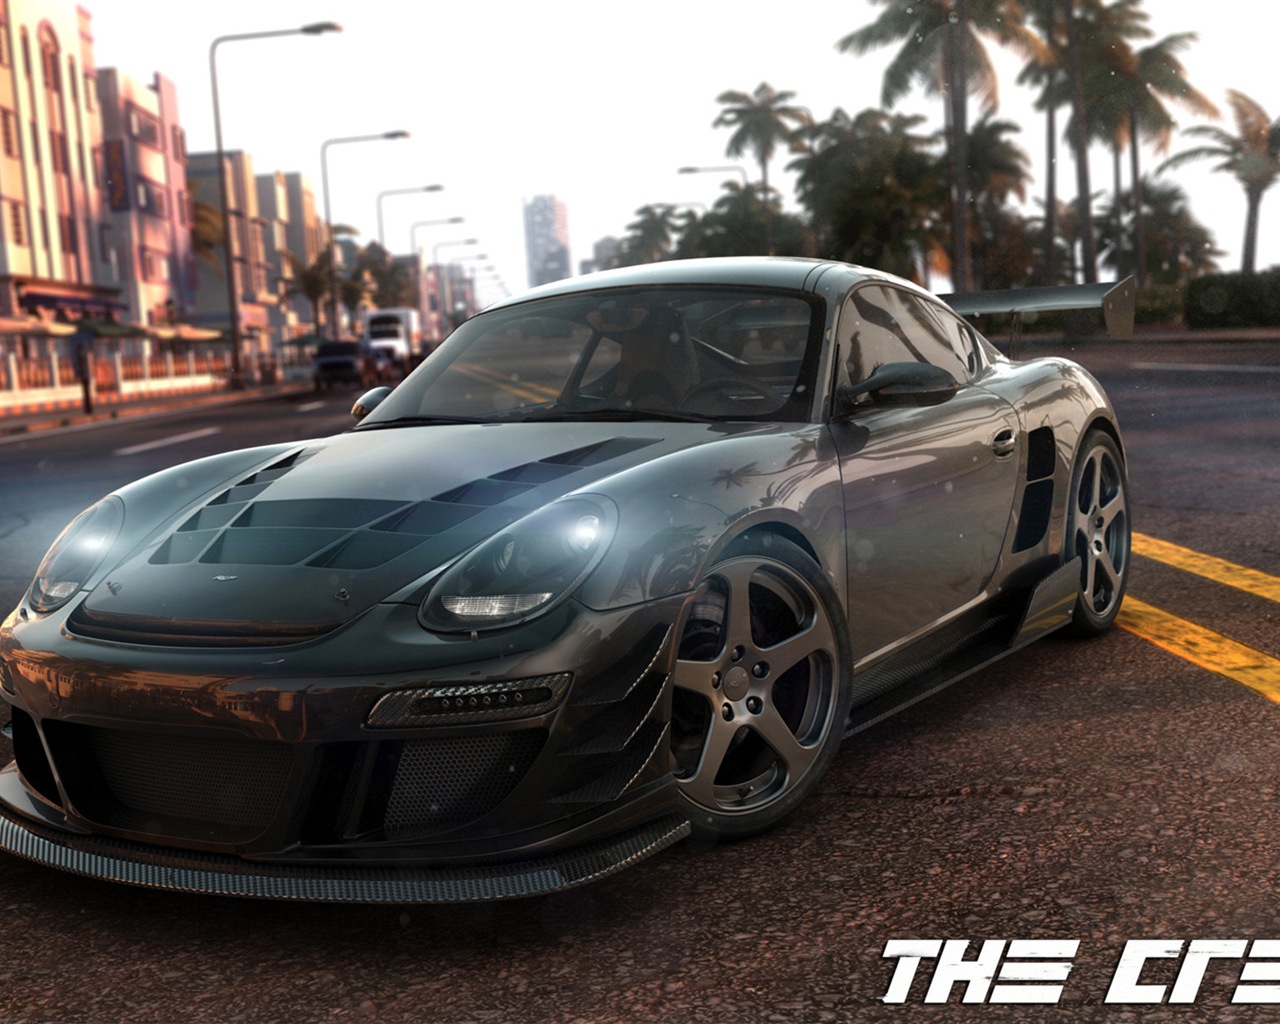 The Crew game HD wallpapers #5 - 1280x1024